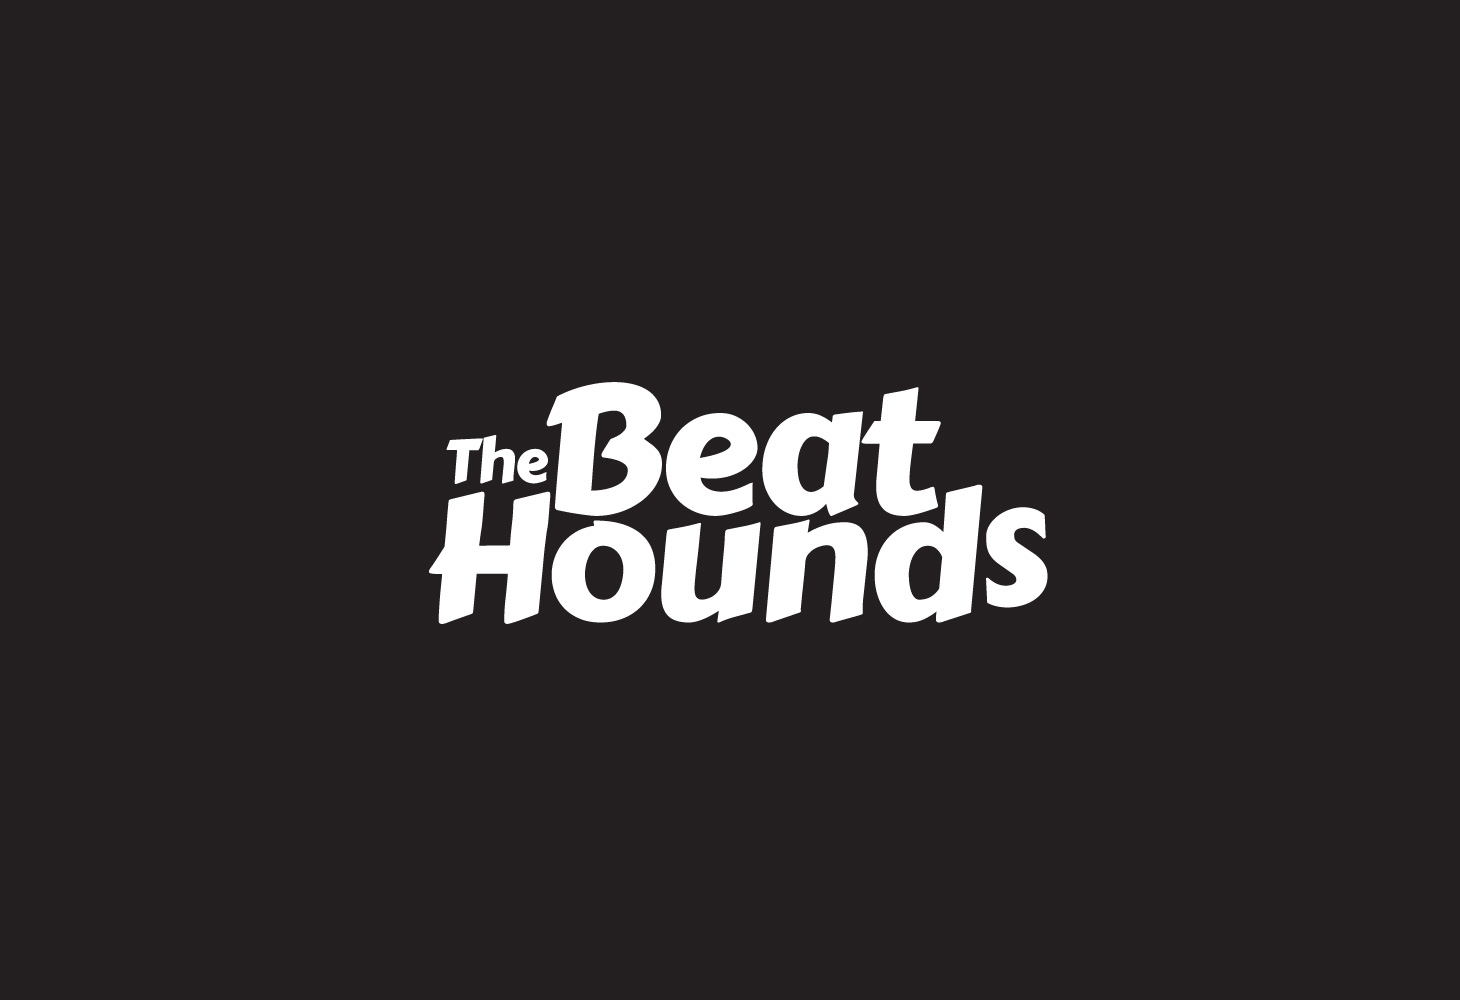 The Beat Hounds - Logotype - On black